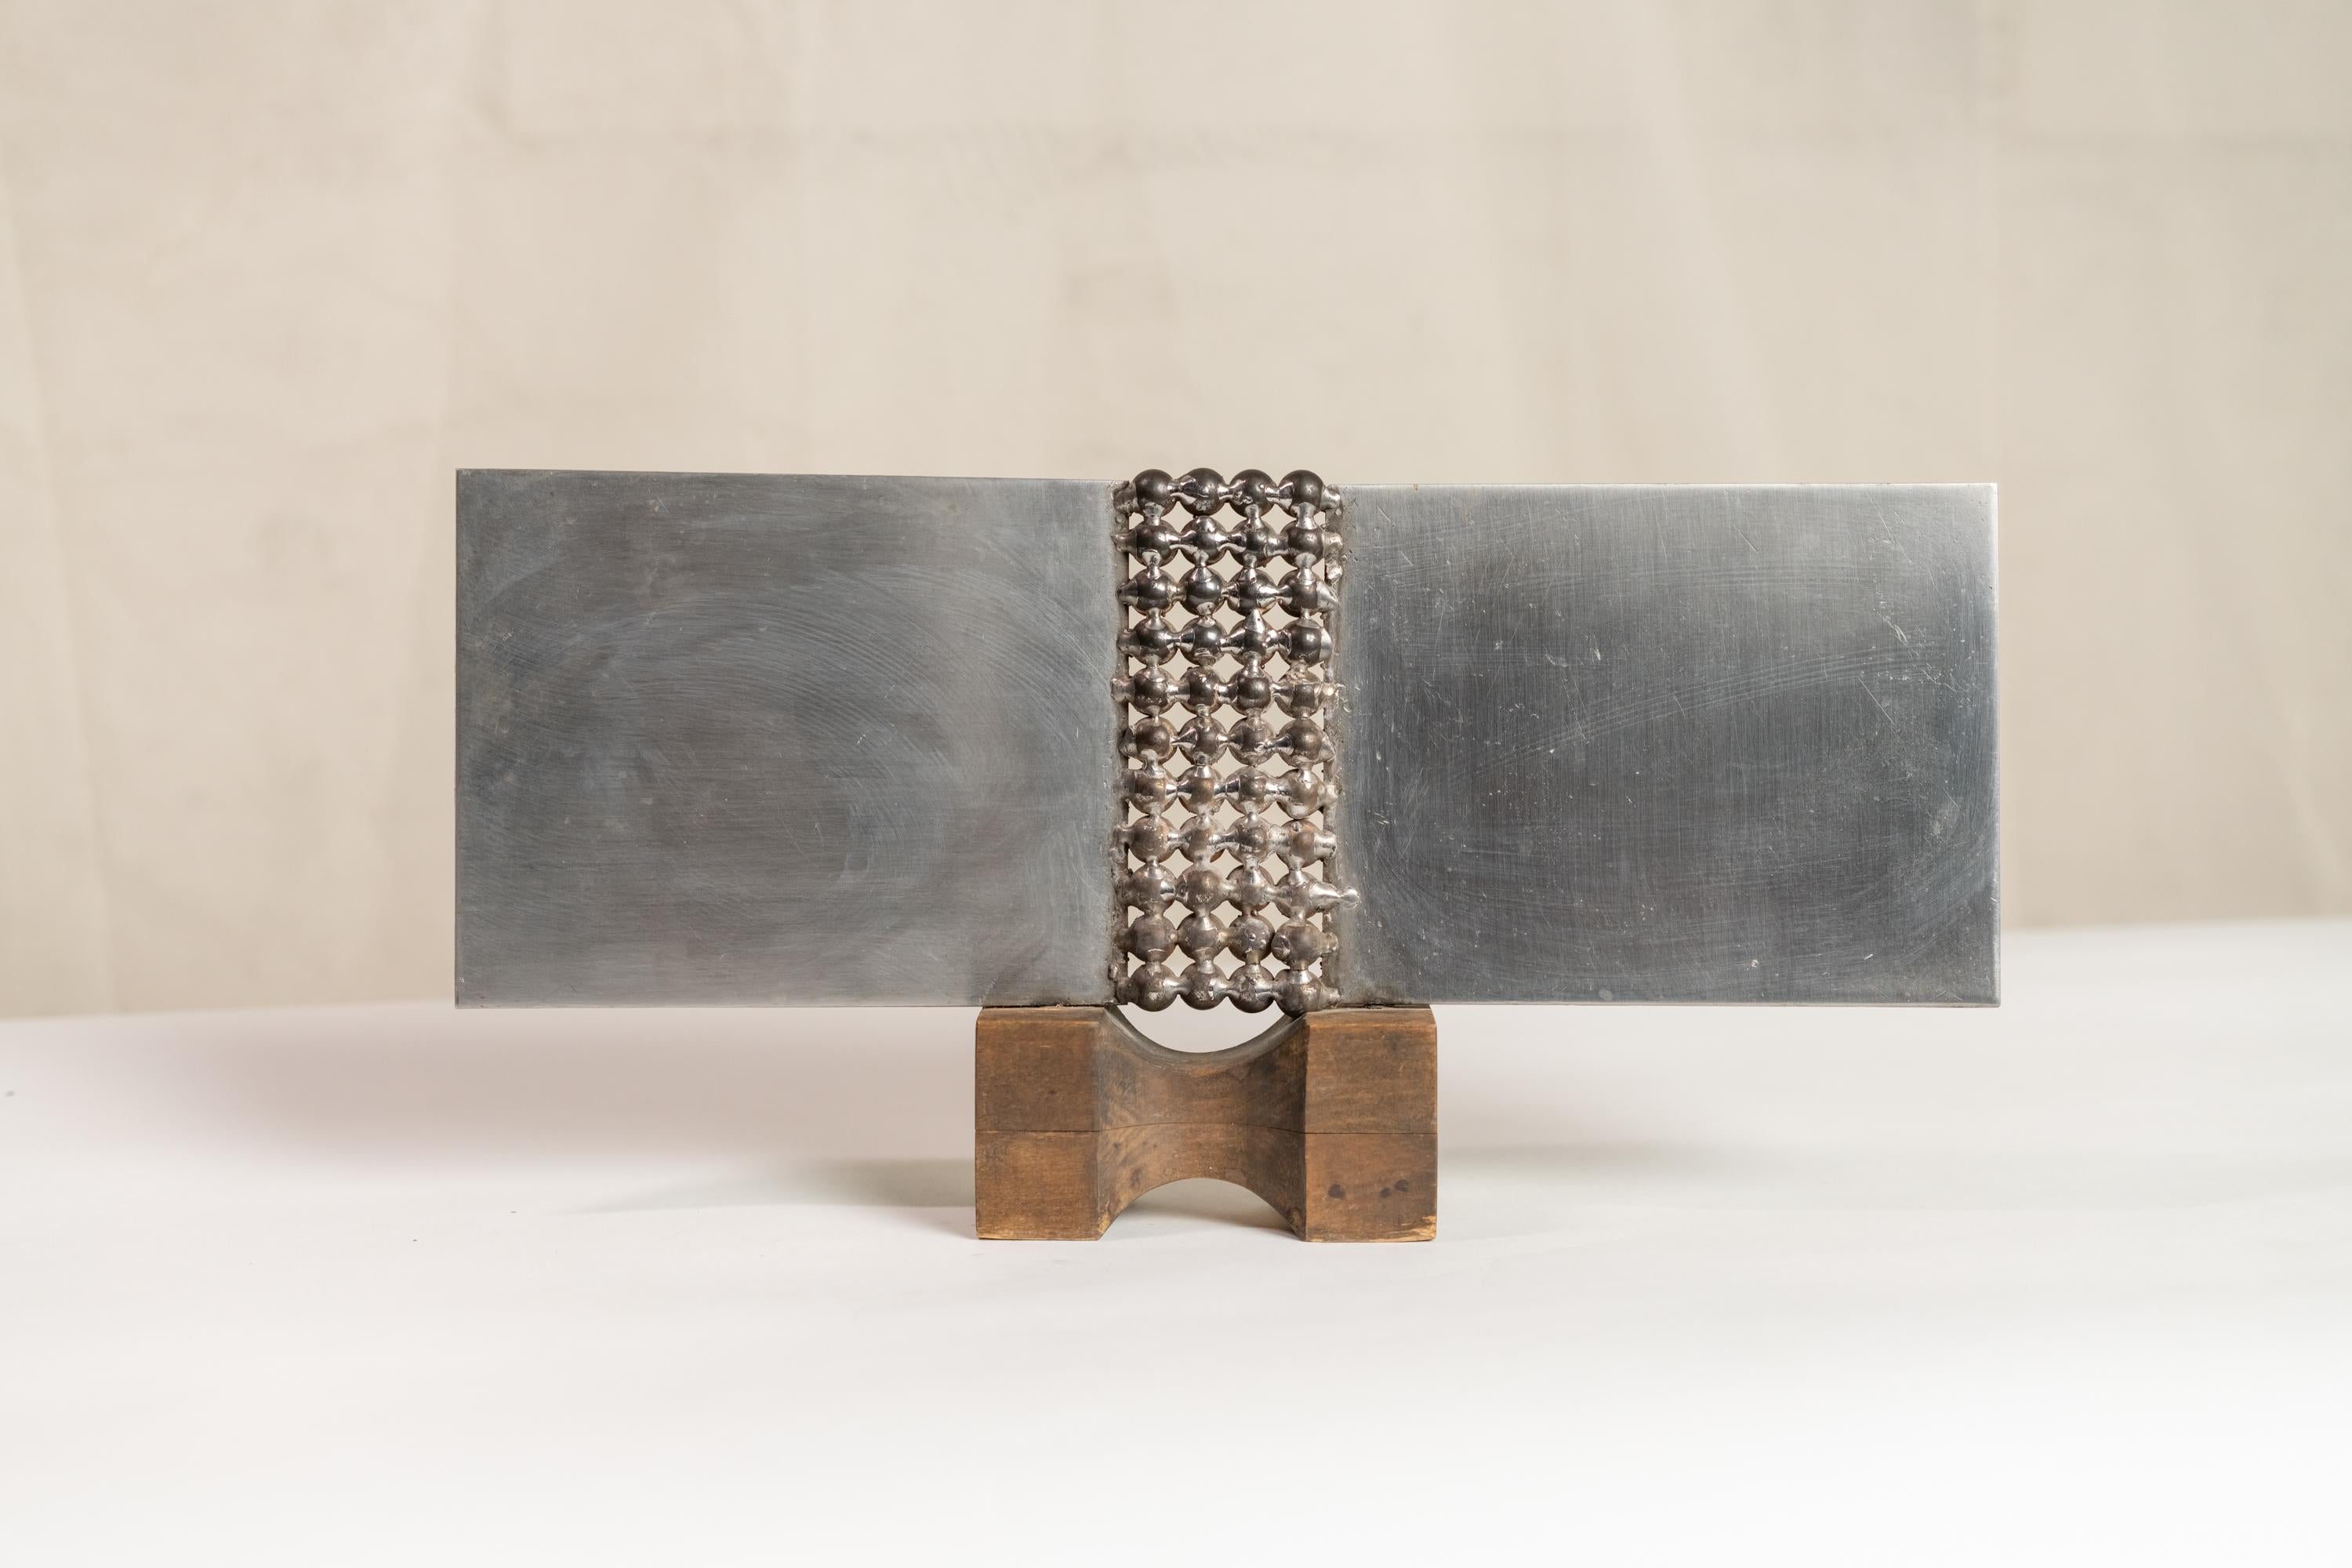 Modernist abstract polished steel sculpture resting on a wooden base. Sticker written: 